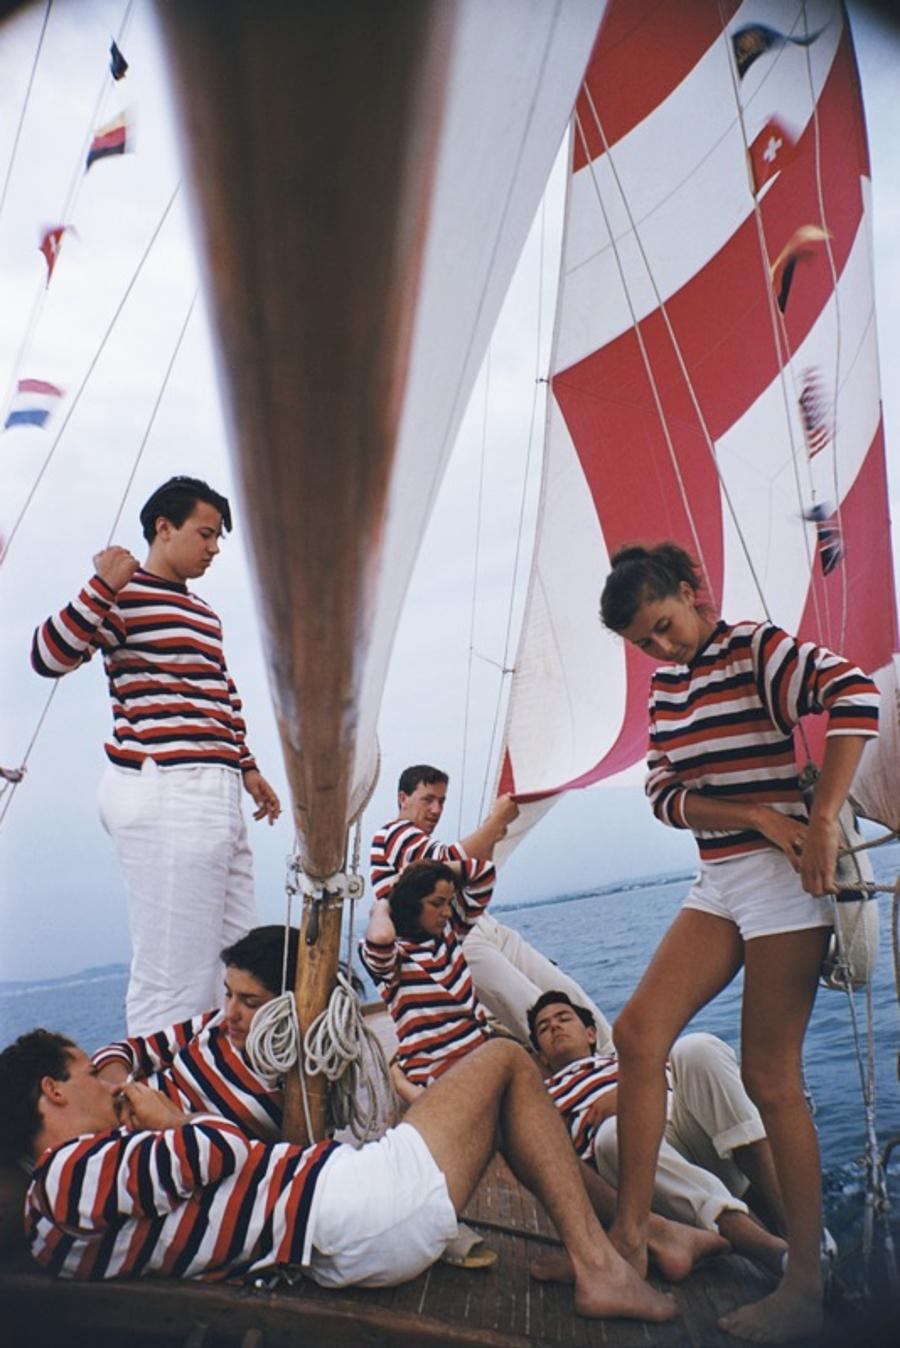 Adriatic Sailors 
1956
by Slim Aarons

Slim Aarons Limited Estate Edition

Young holidaymakers from Milan enjoy a sail on the Adriatic, 1956

unframed
c type print
printed 2023
24 x 20"  - paper size

Limited to 150 prints only – regardless of paper